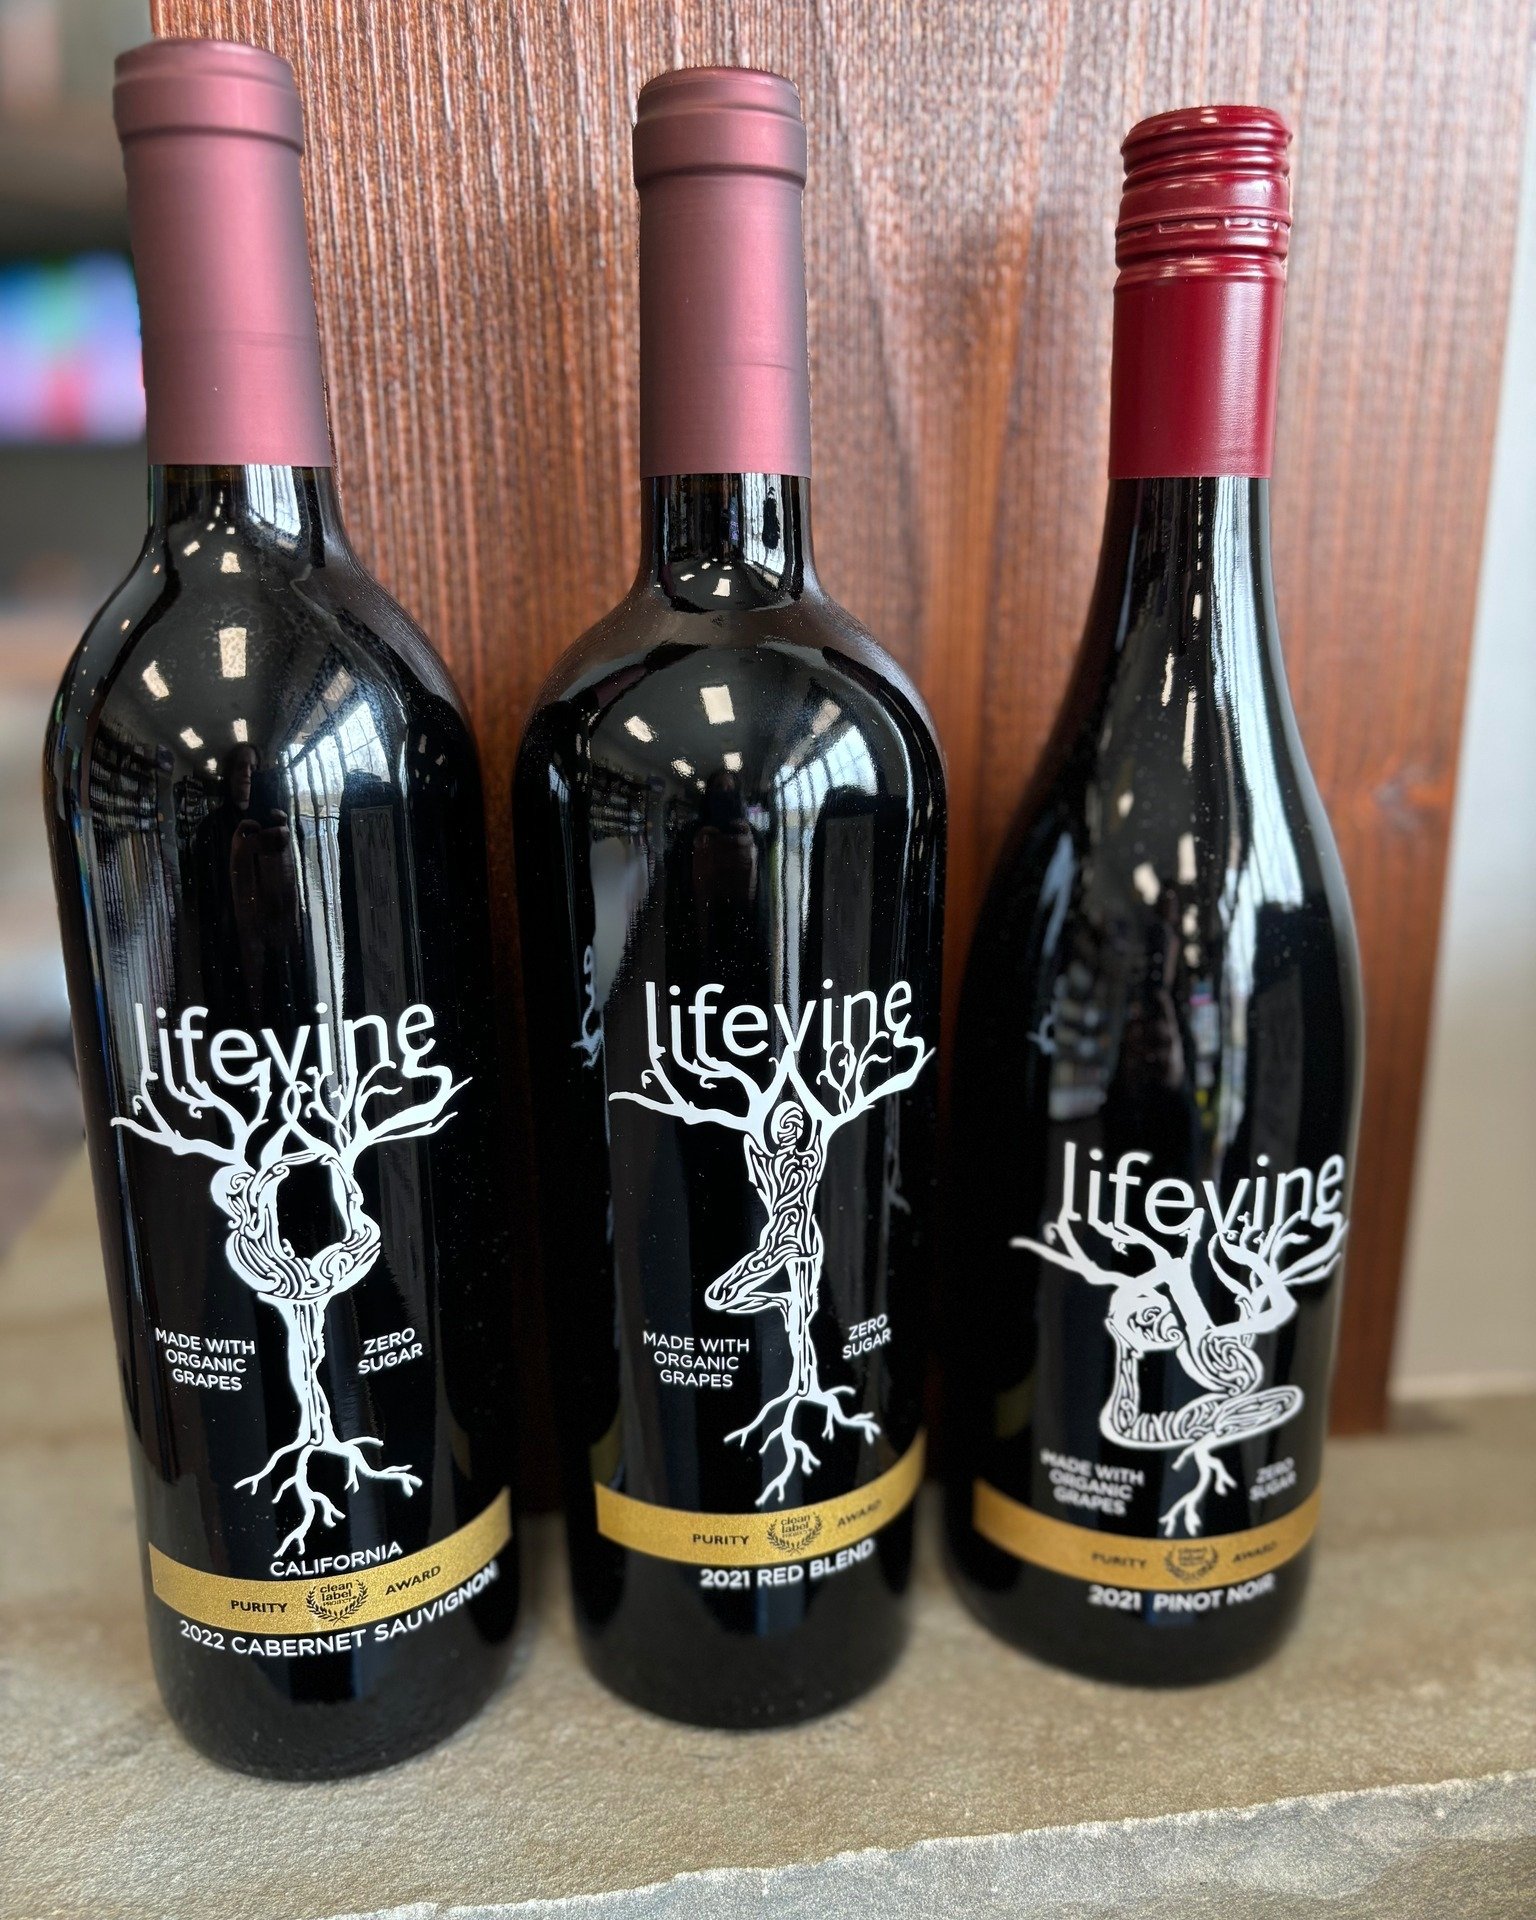 ✨New to the store✨

🍷SUGAR FREE wines from Lifevine! 

⏰Business Hours:
Sunday to Wednesday 9 am to 8 pm
Thursday to Saturday 9 am to 10 pm